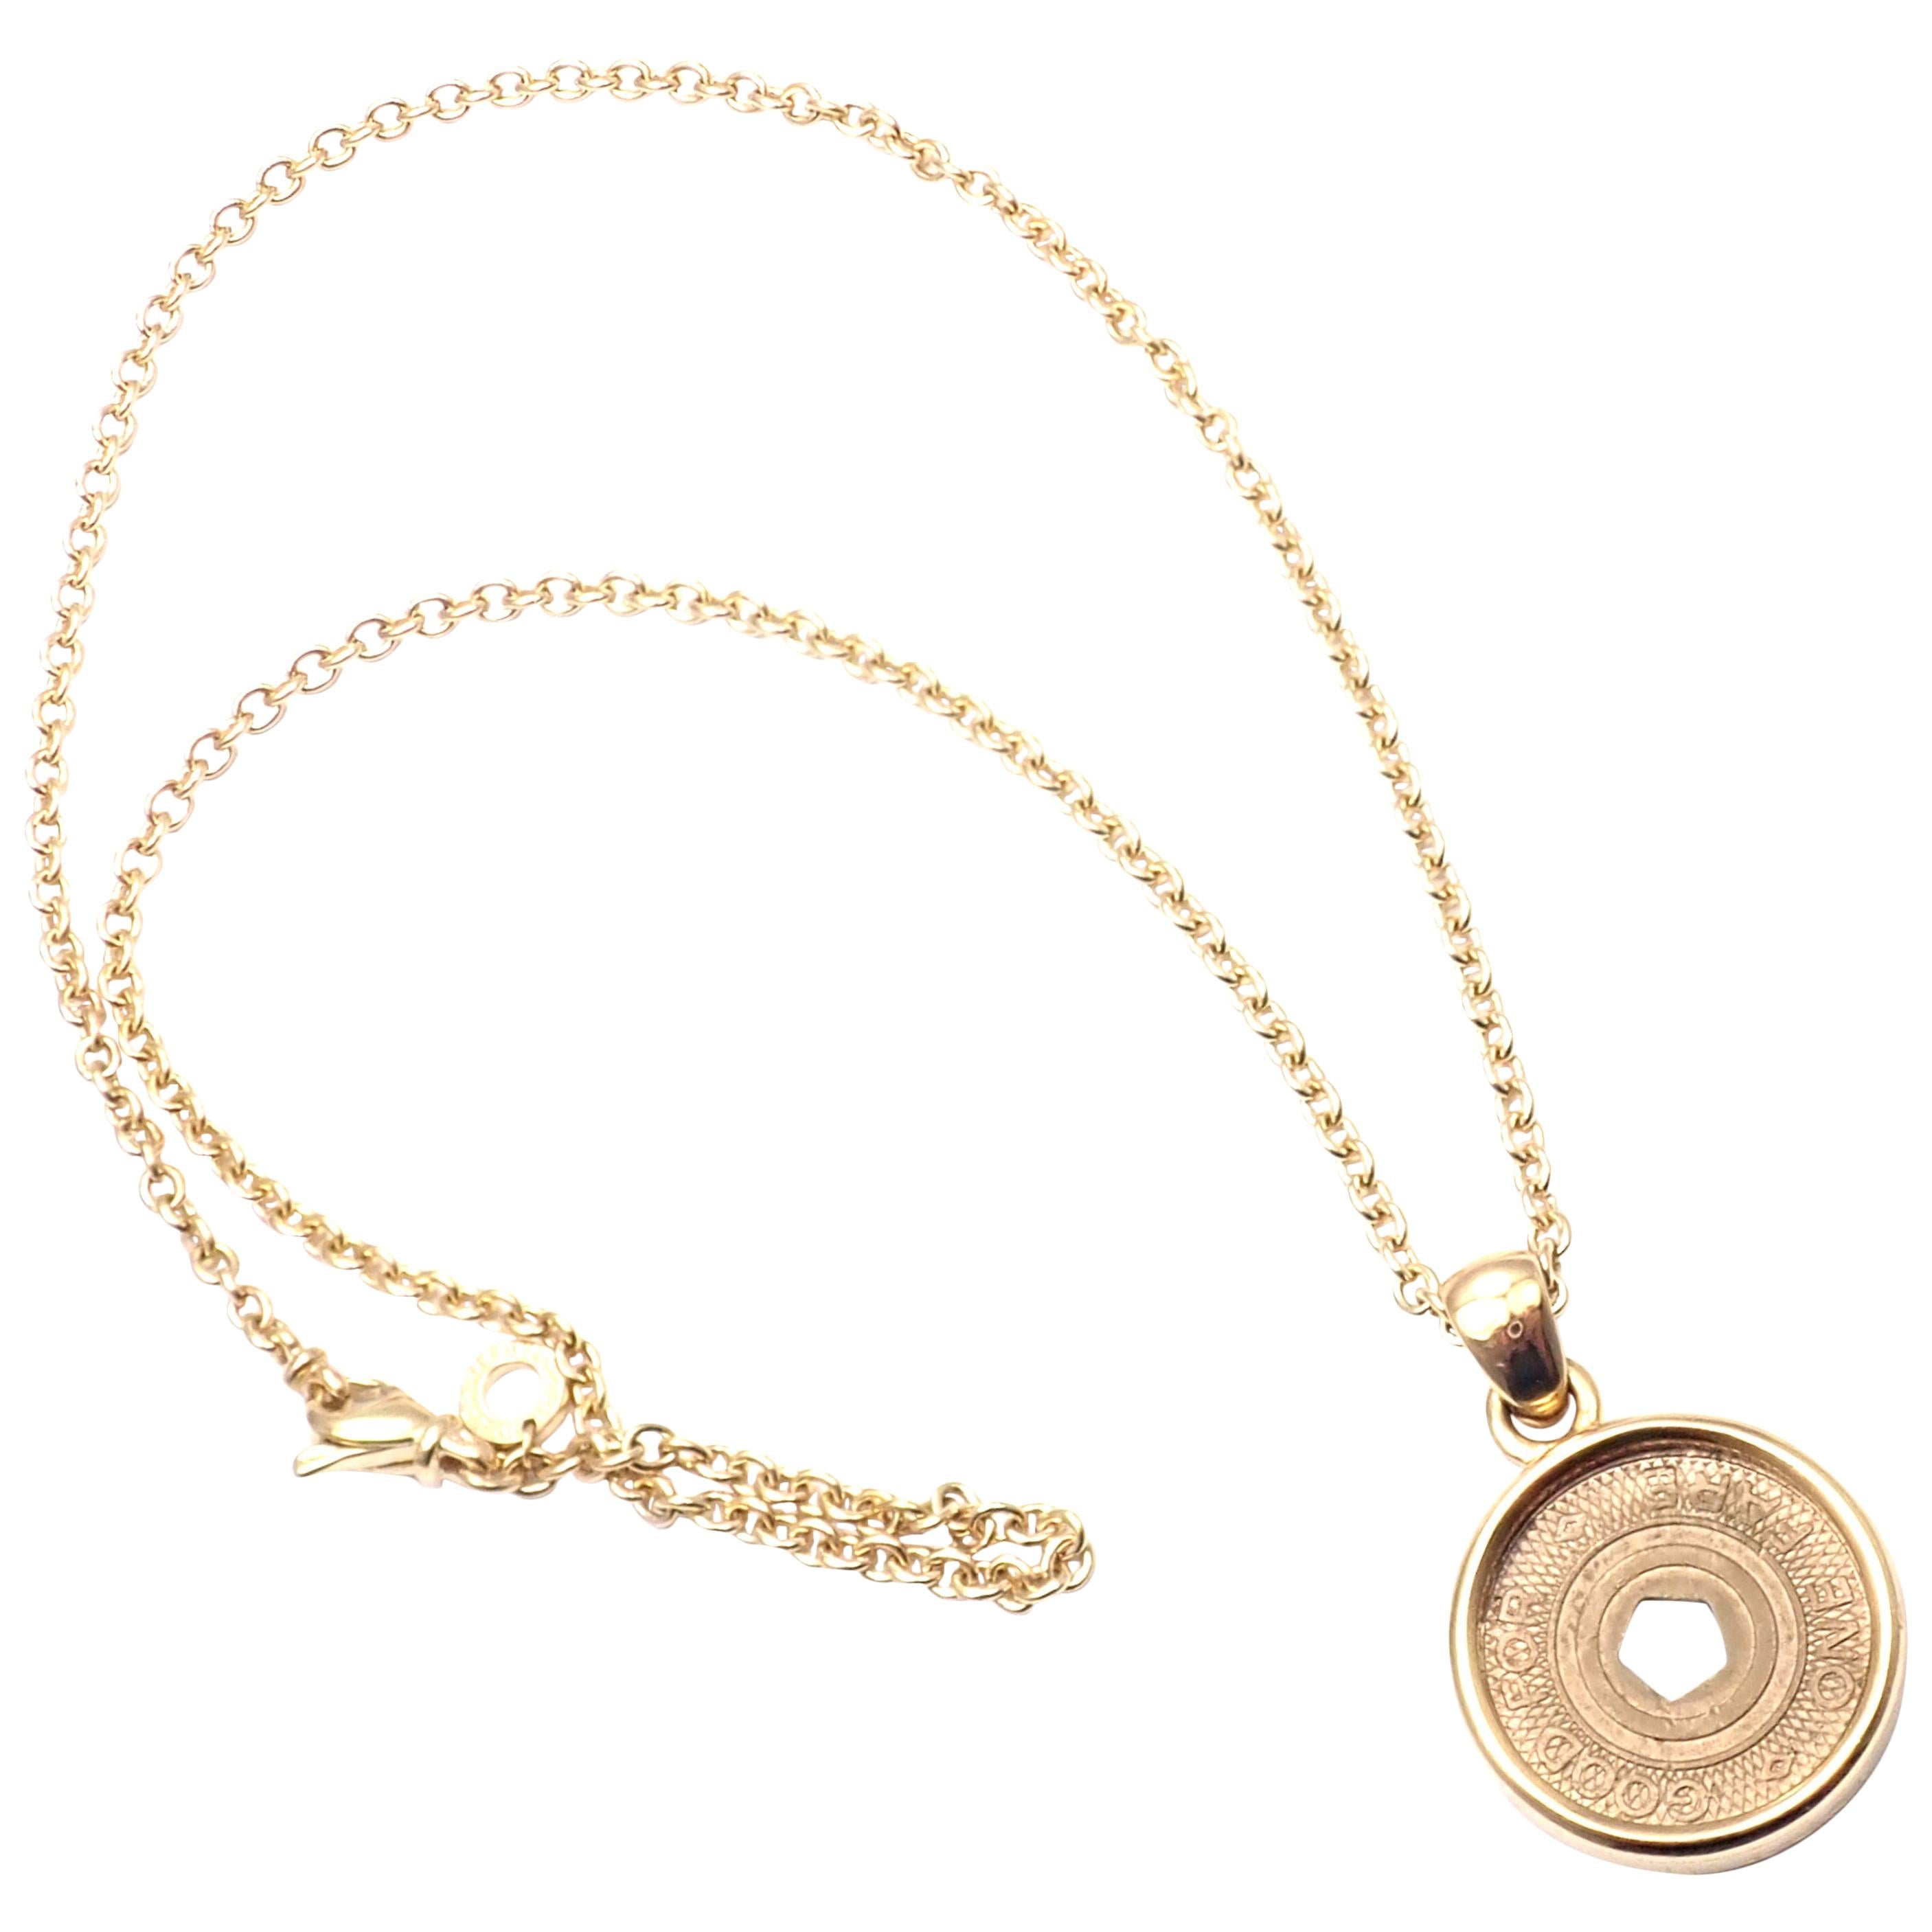 Bulgari NYC Subway Token Limited Edition Yellow Gold Pendant Necklace For Sale